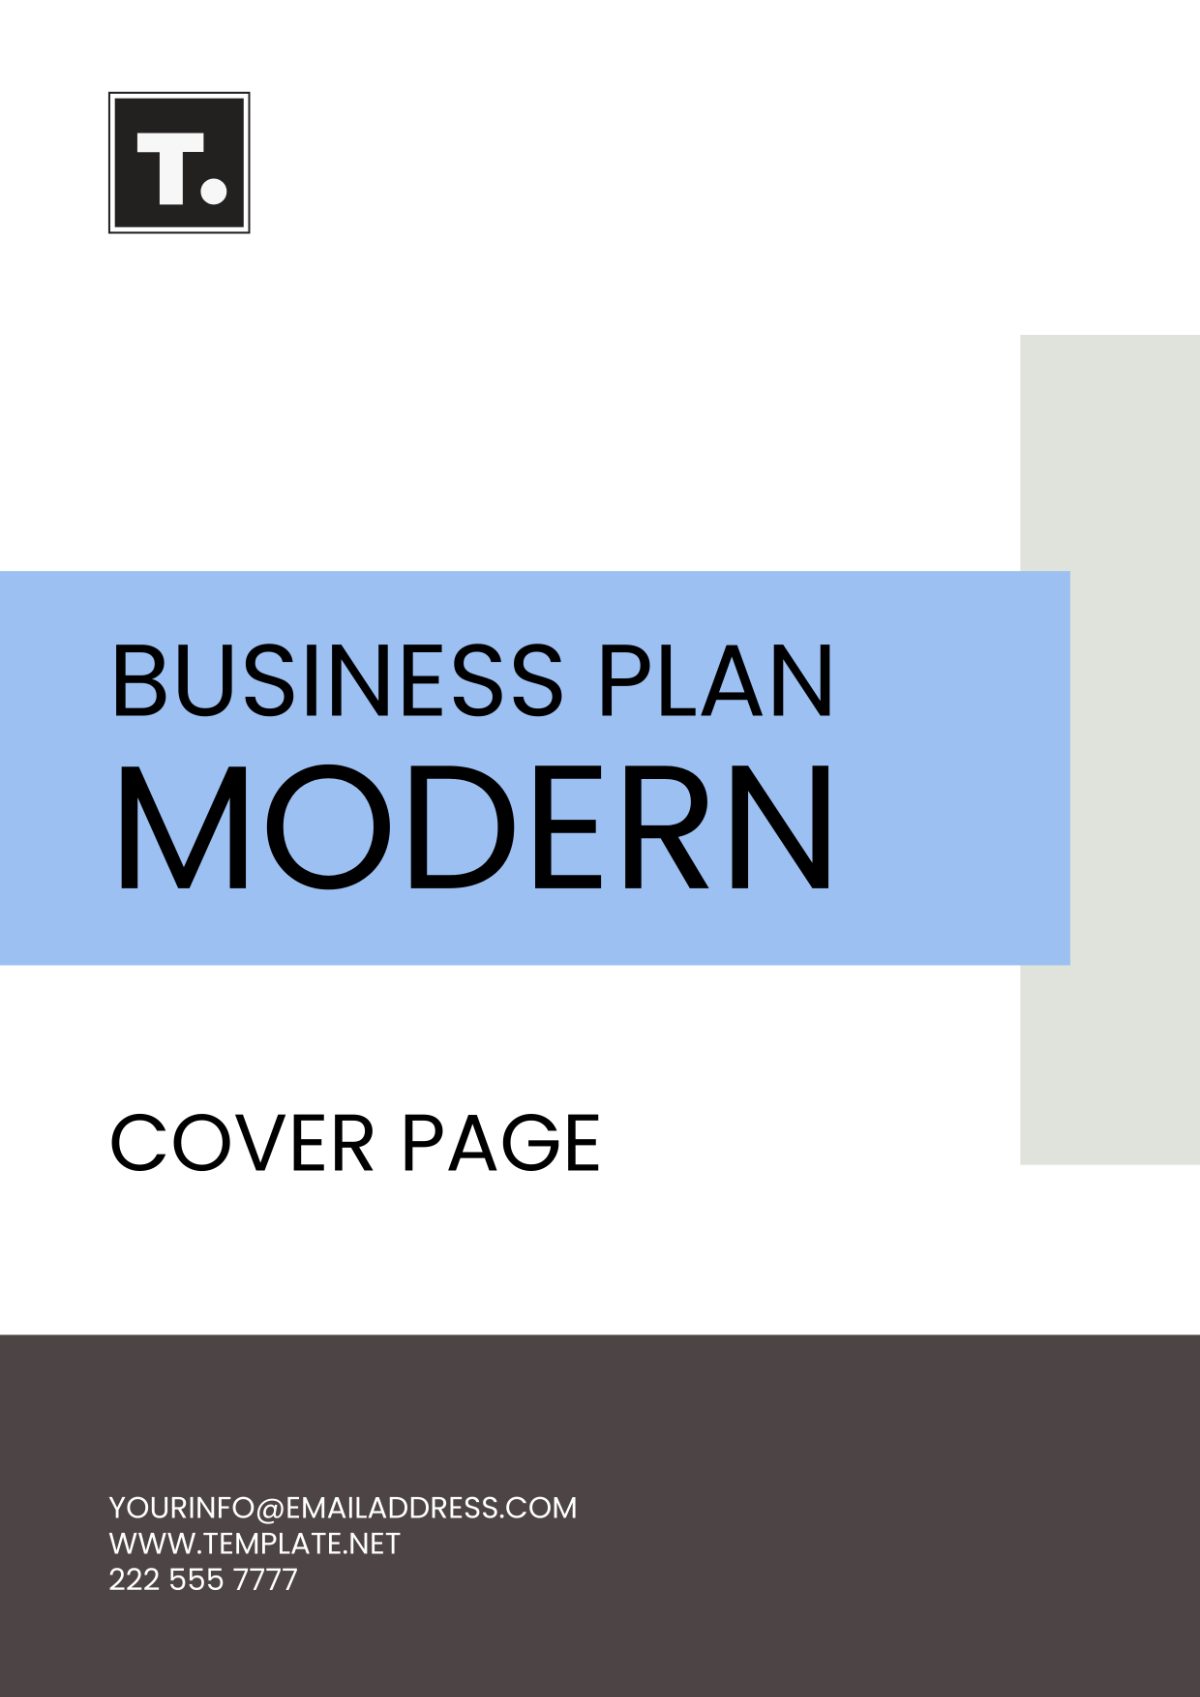 Business Plan Modern Cover Page Template